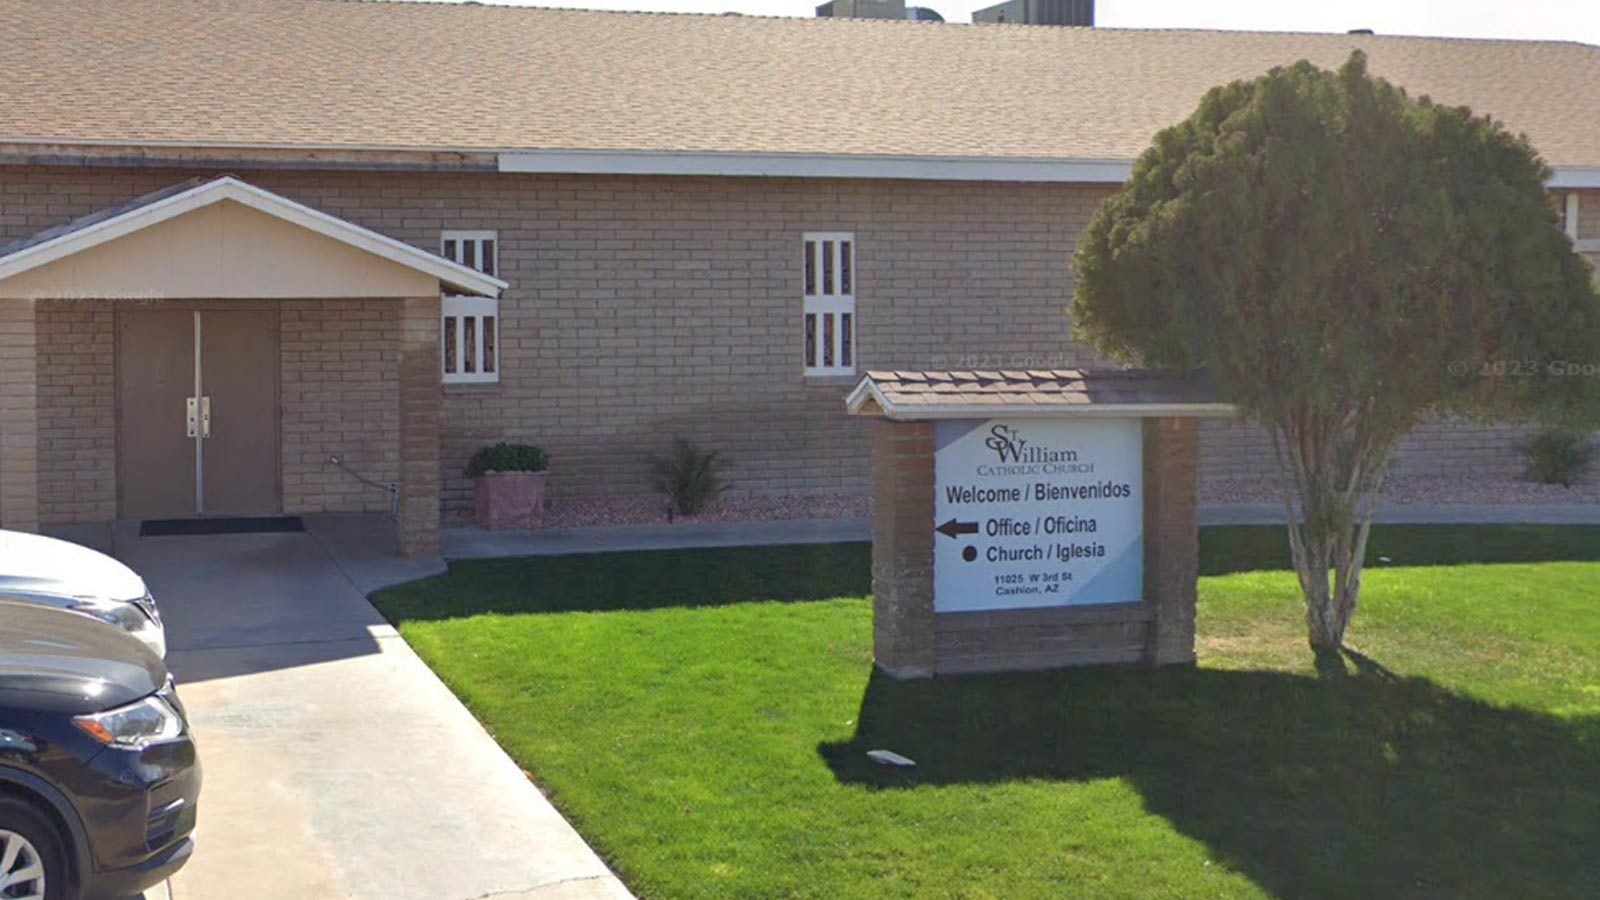 Google Street View image of a sign in front of St. William Catholic Church in Avondale, Arizona. Th...